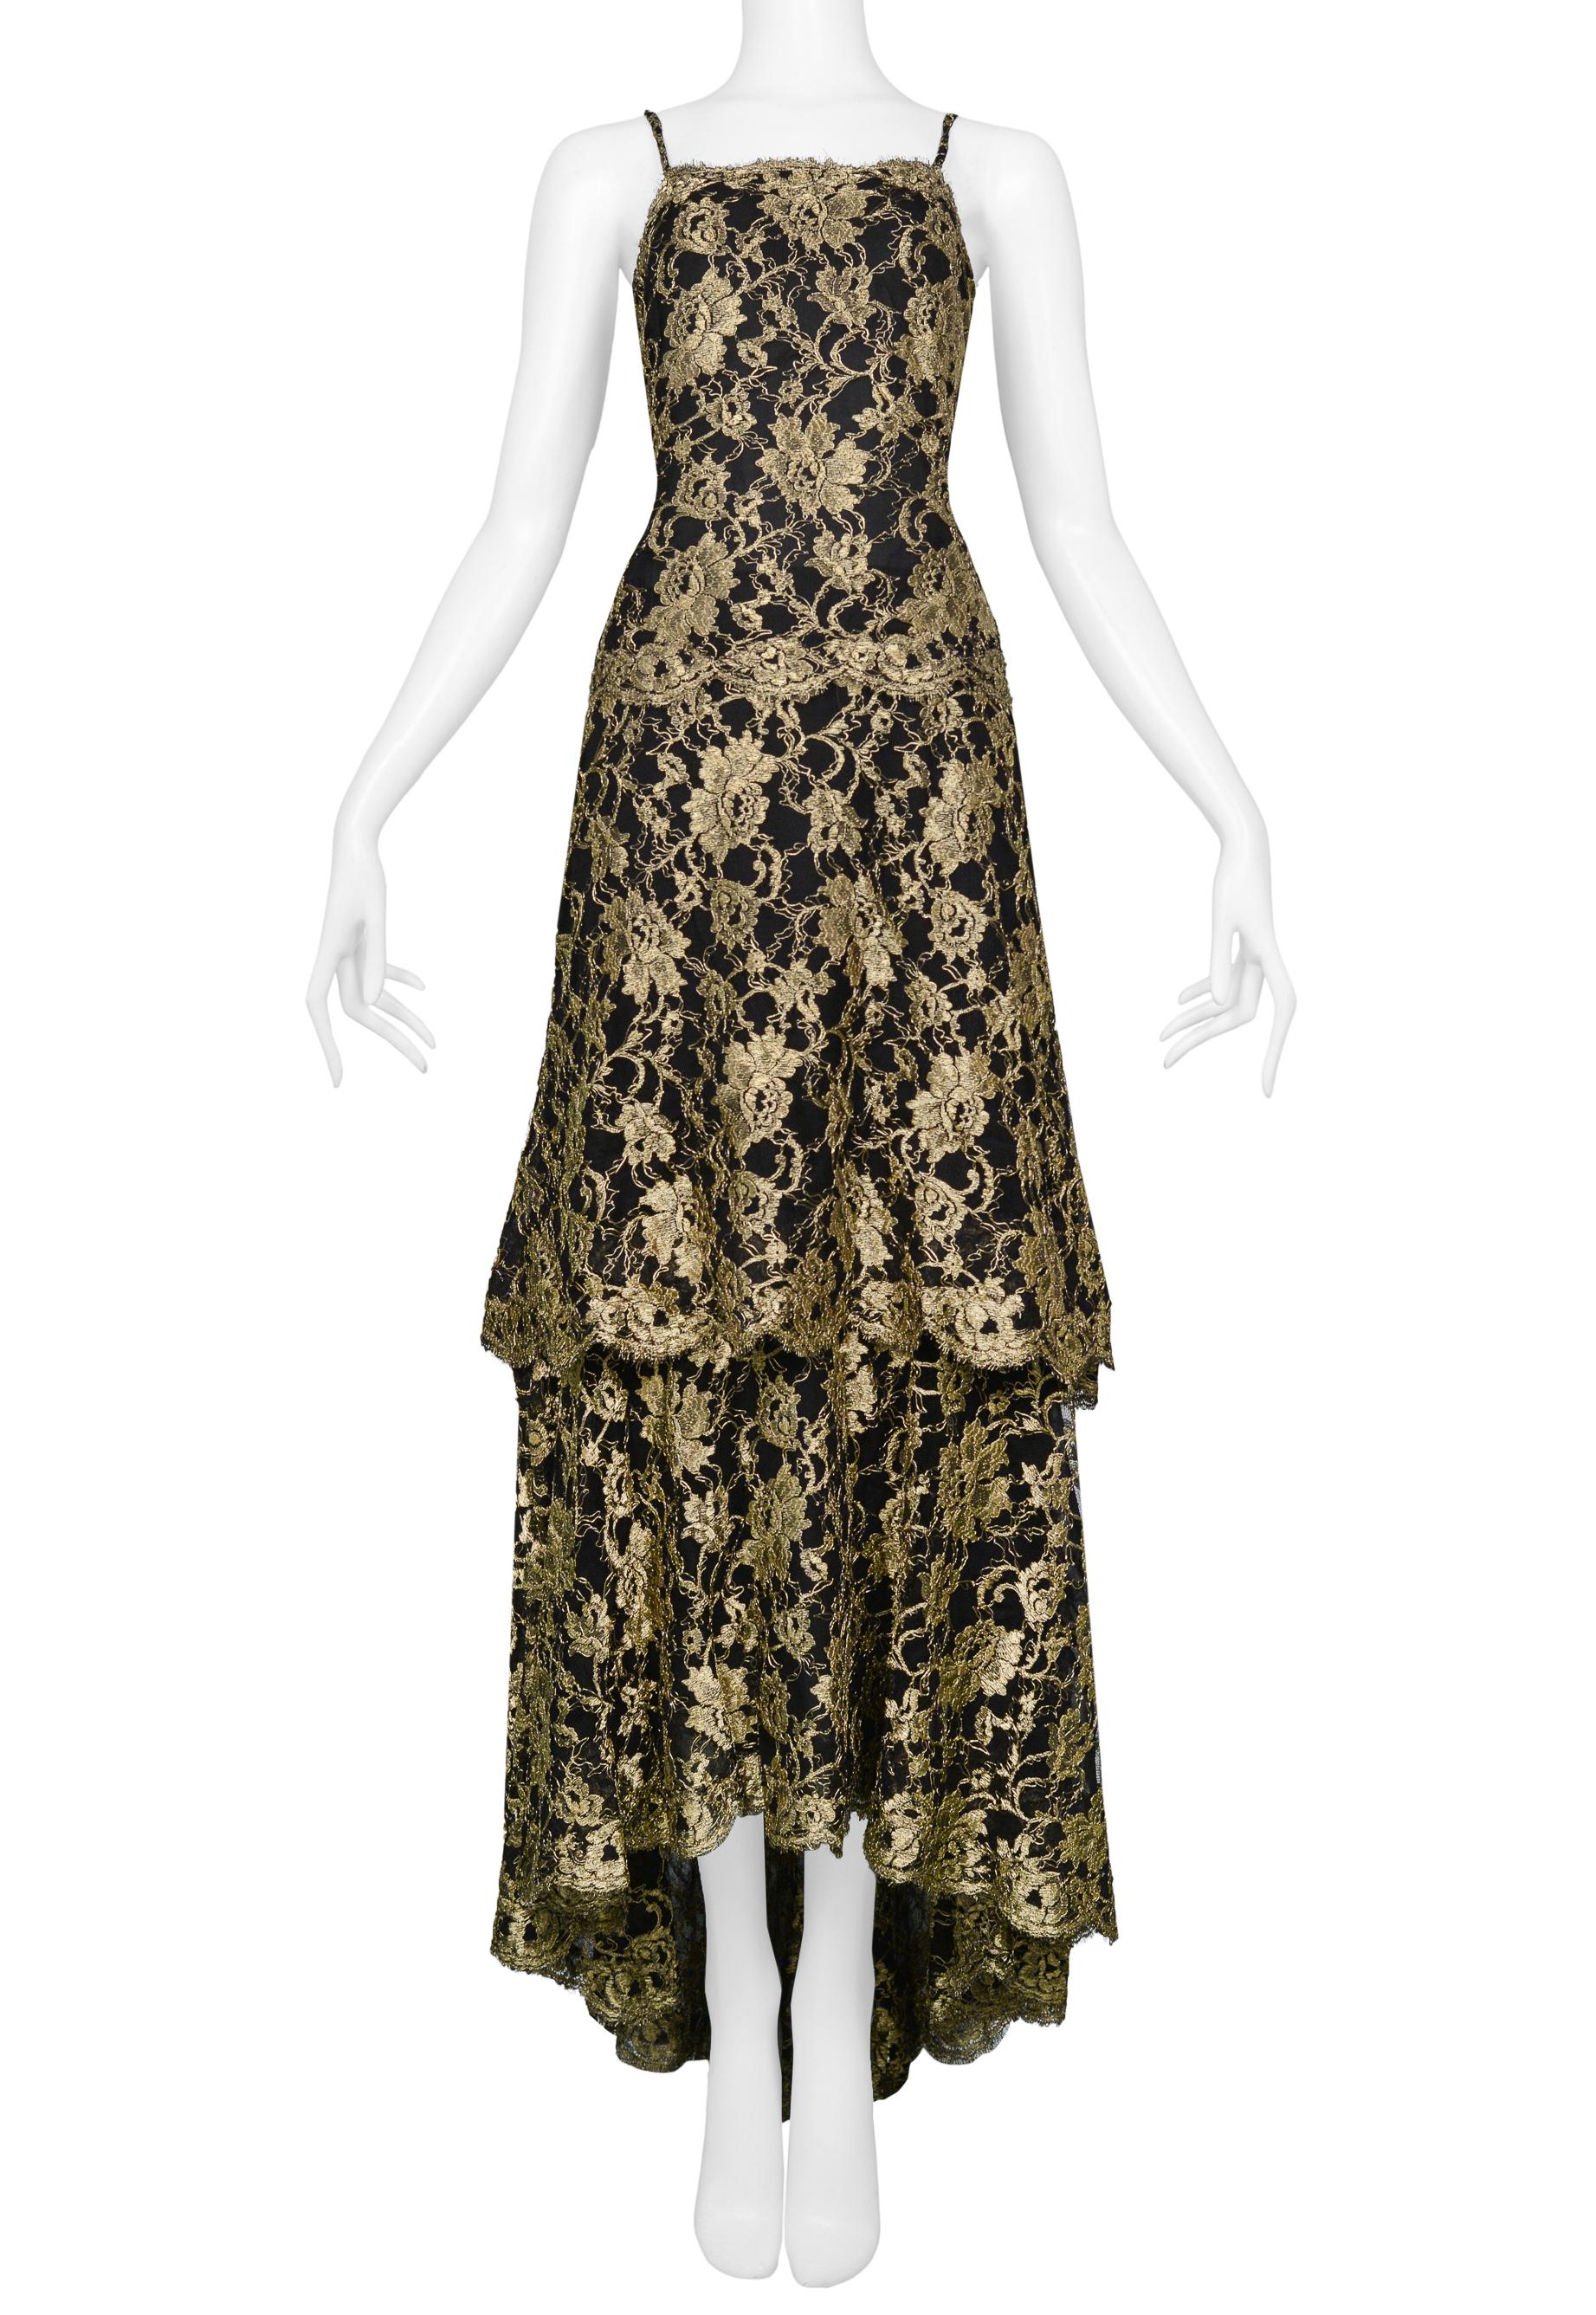 Chanel By Karl Lagerfeld Gold & Black Lace Evening Gown 1986 1